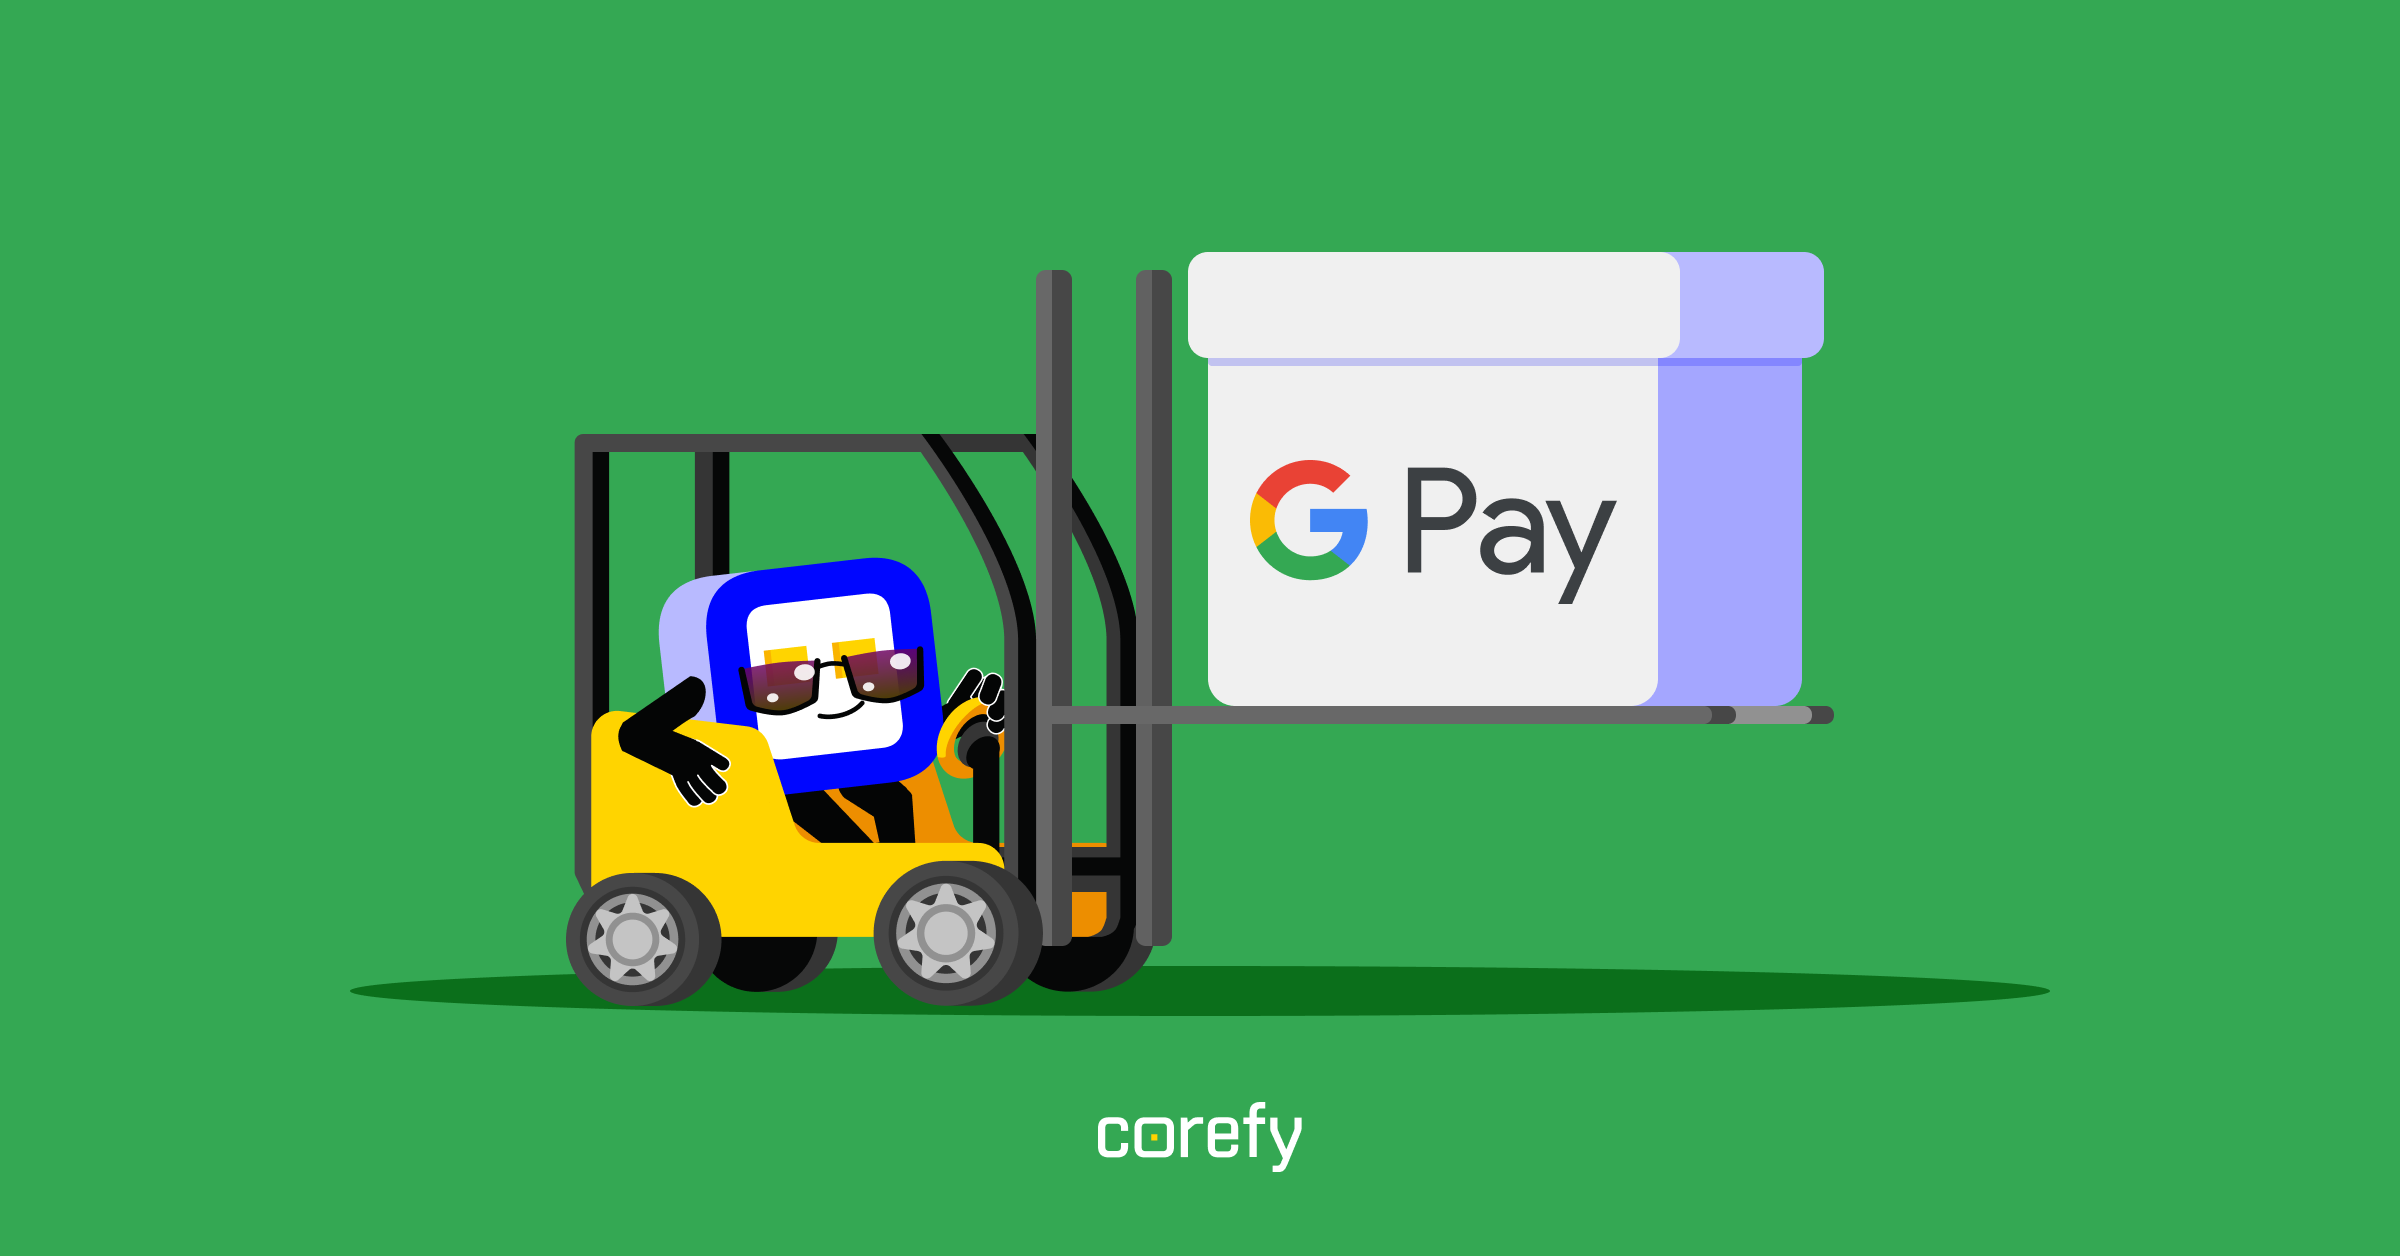 How to benefit from Corefy’s direct integration with Google Pay